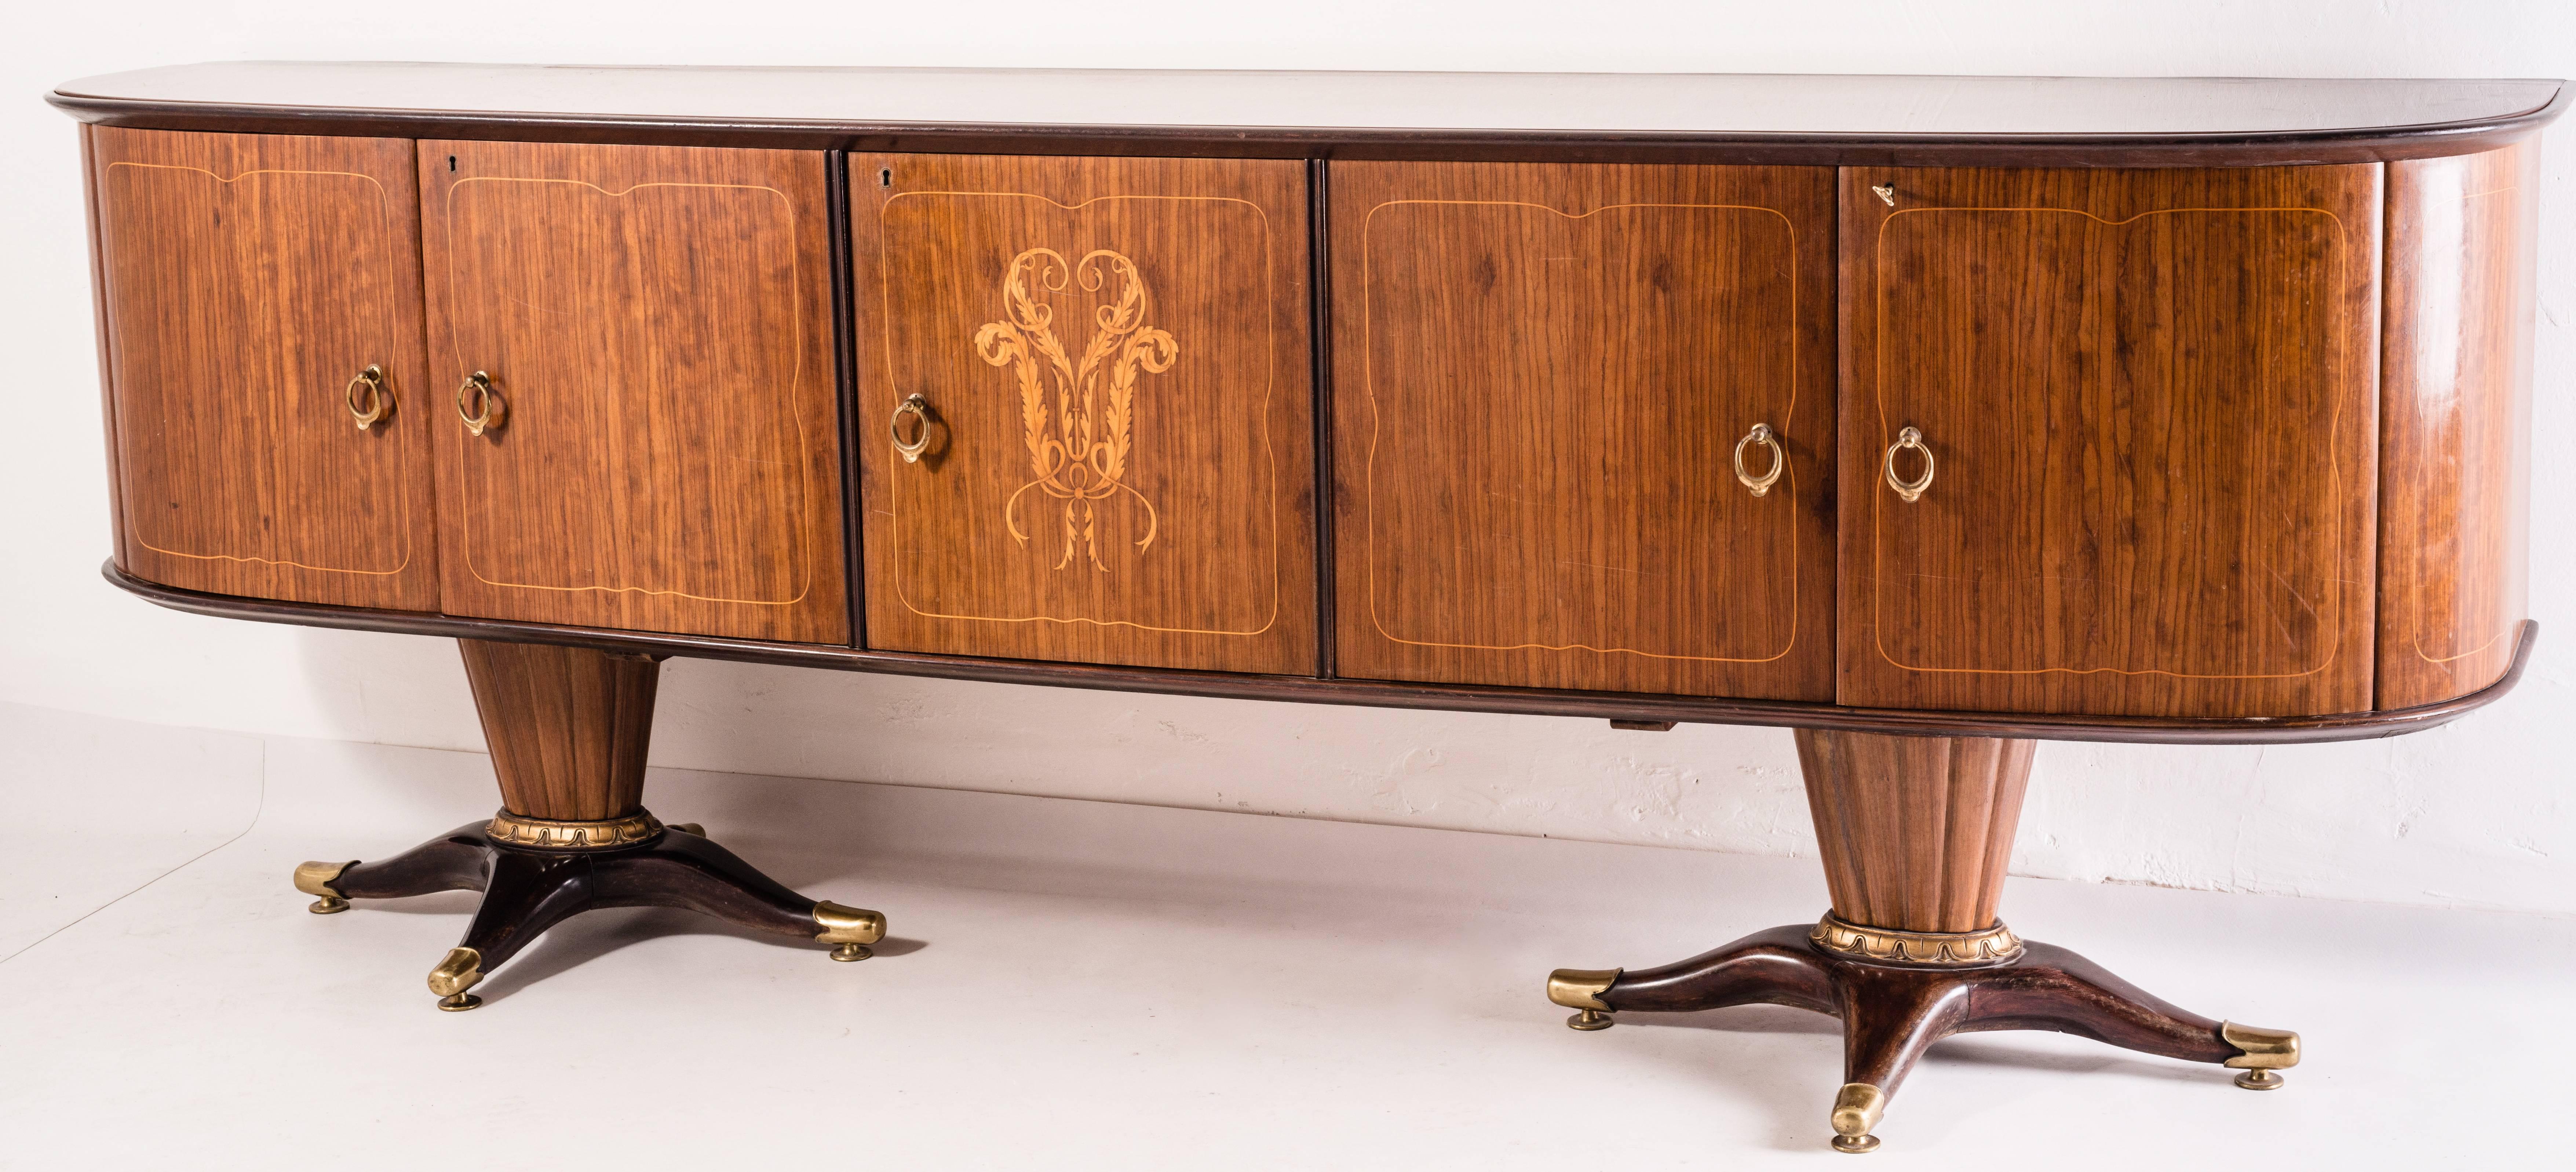 Beautiful sideboard with mirror attributed to Paolo Buffa, 1950s. The piece is really rare and important. The sideboard cabinet is supported by two major foot socks with bronze. Handmade edges around the mirror.
   